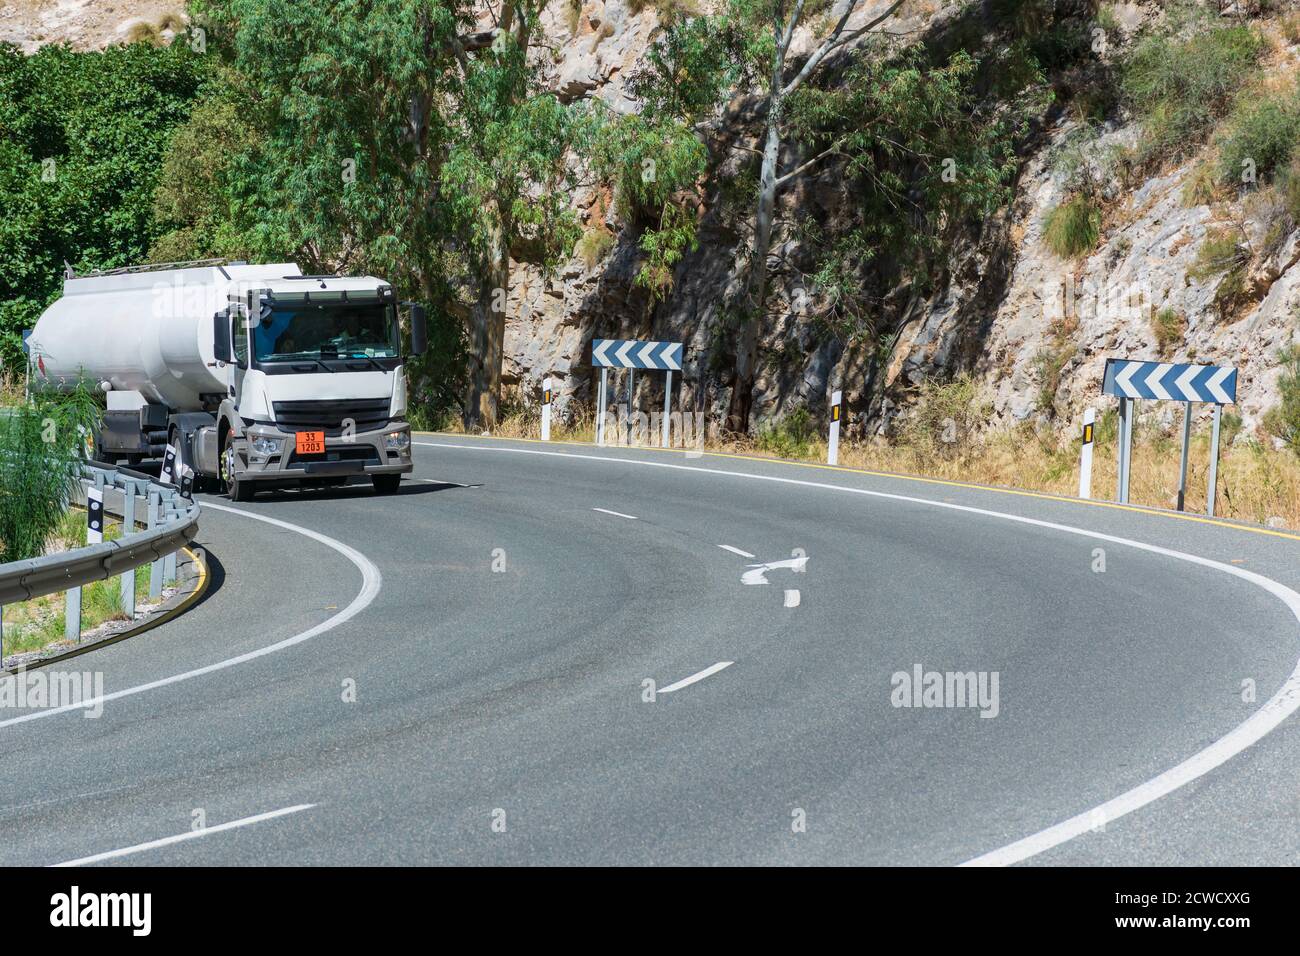 Fuel tank truck driving around a curve in the road Stock Photo